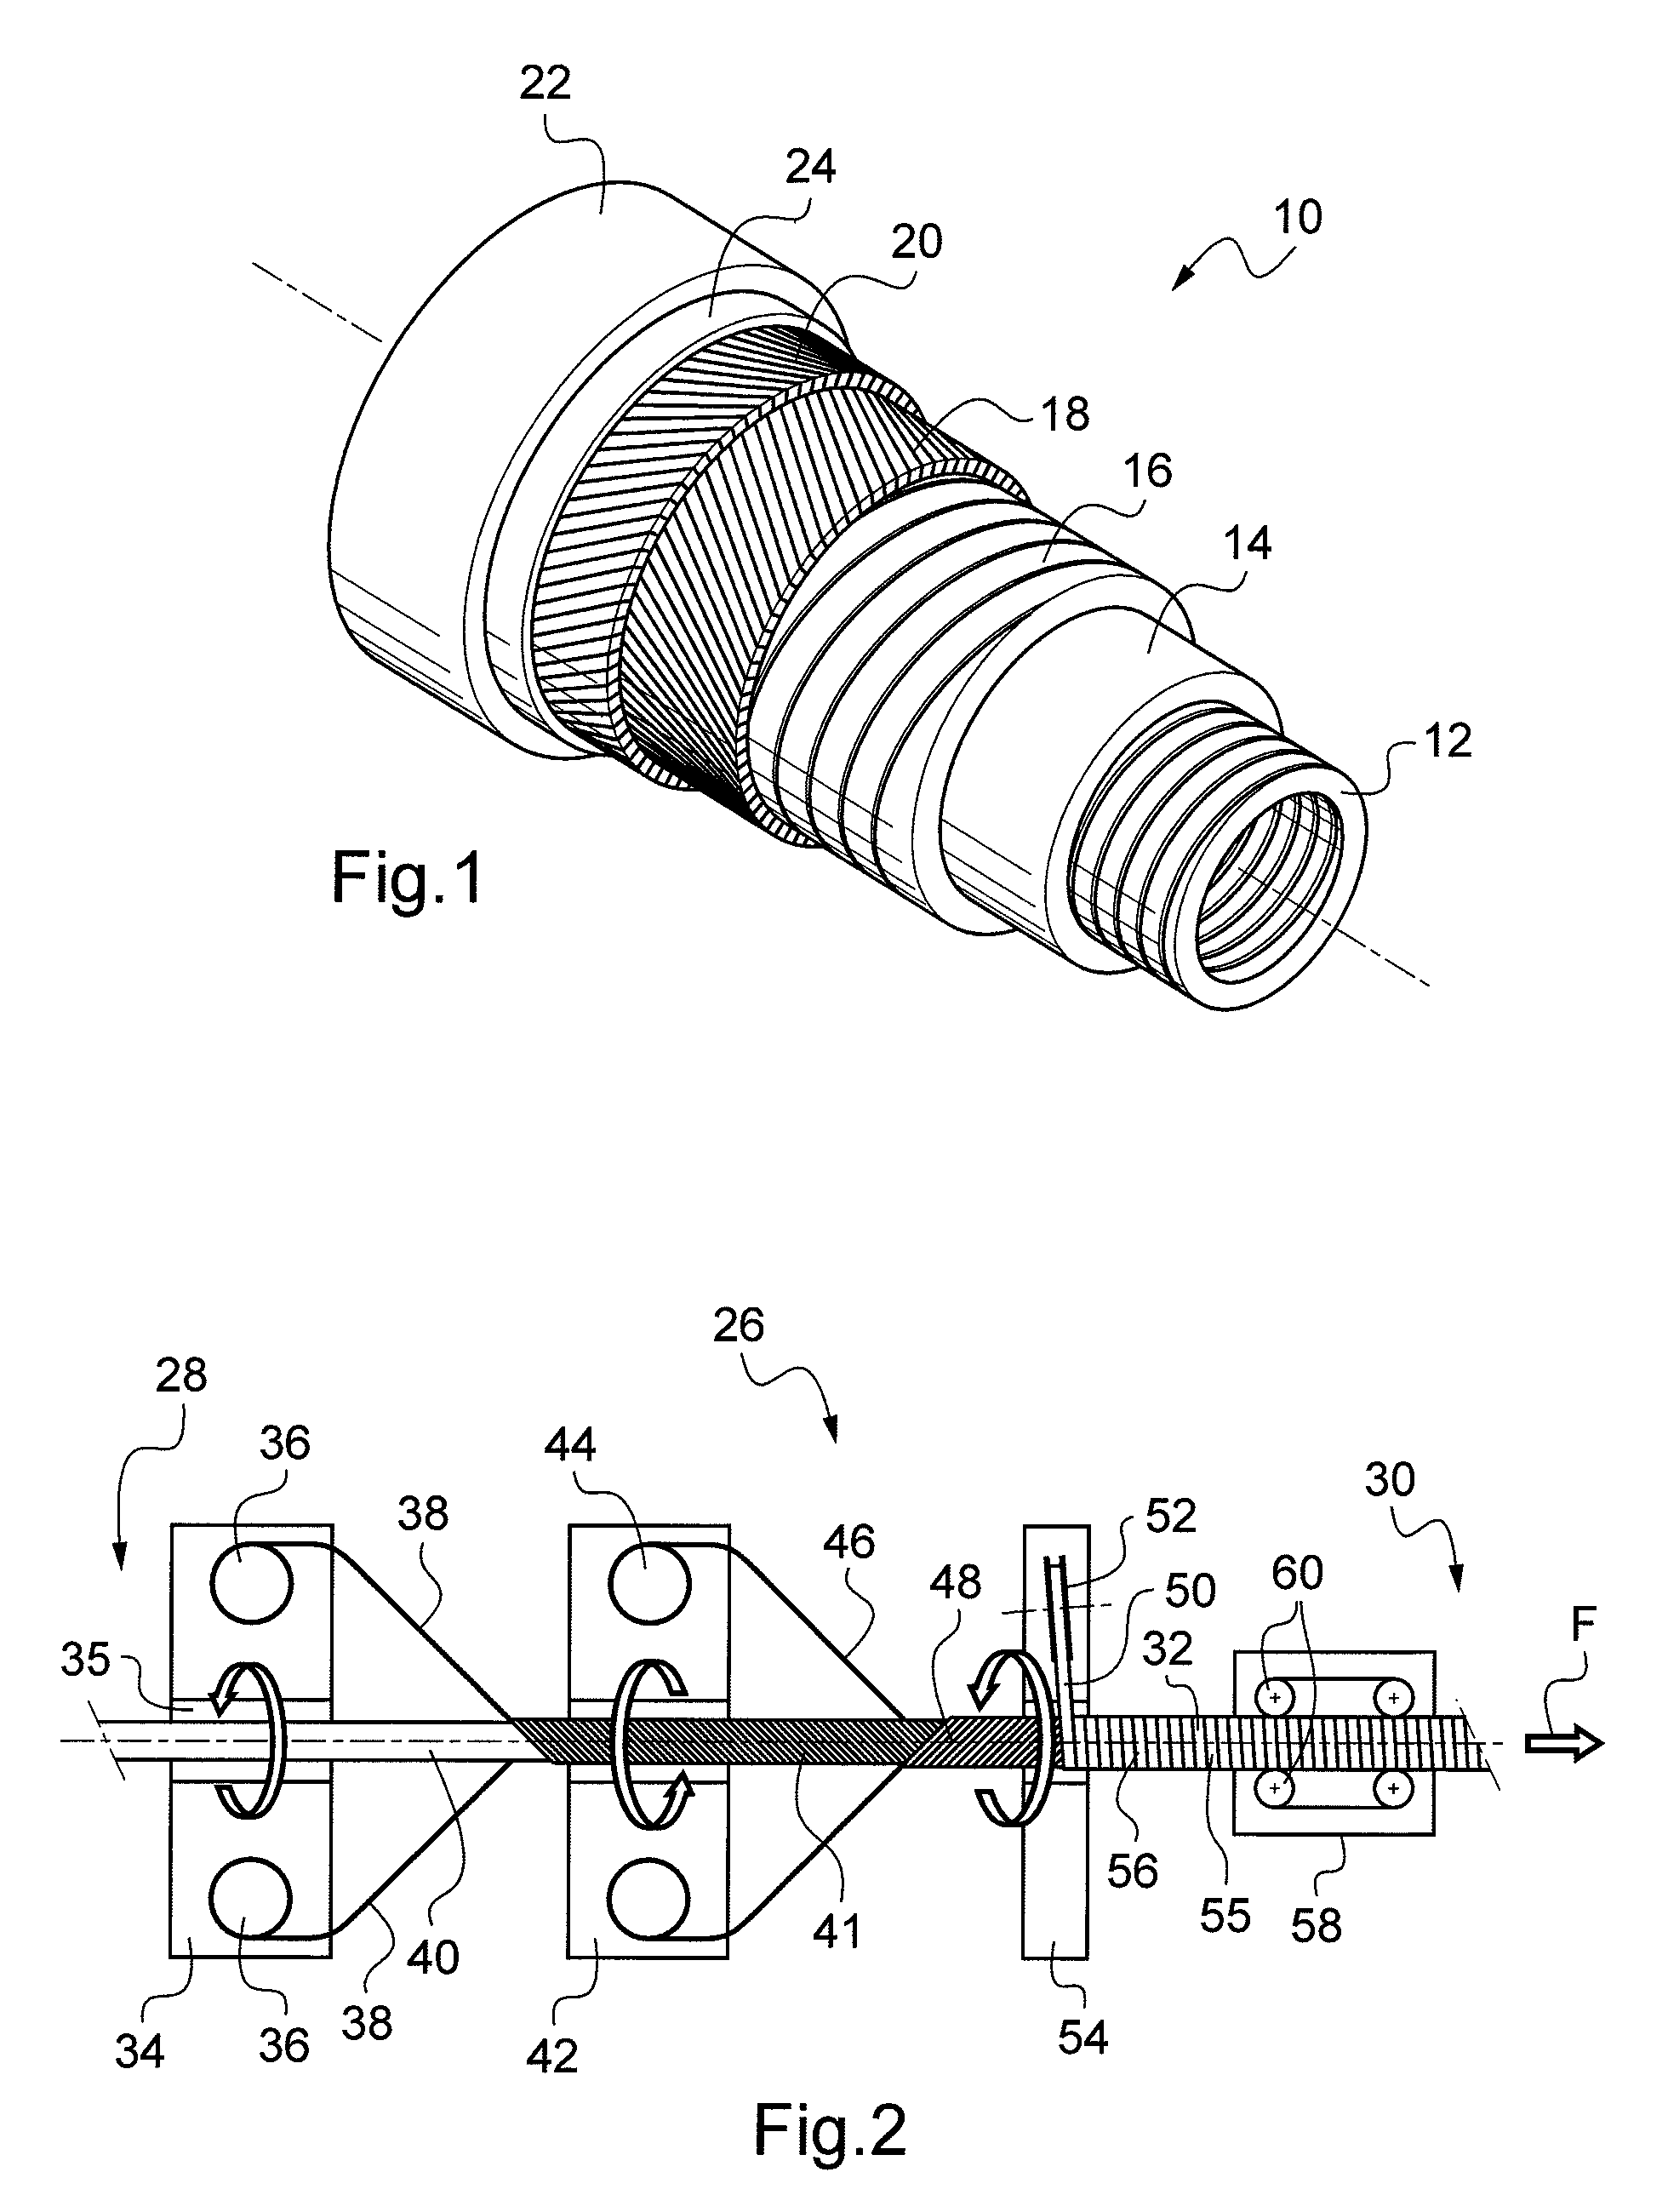 Flexible tubular underwater pipe for great depths, and method for manufacturing same